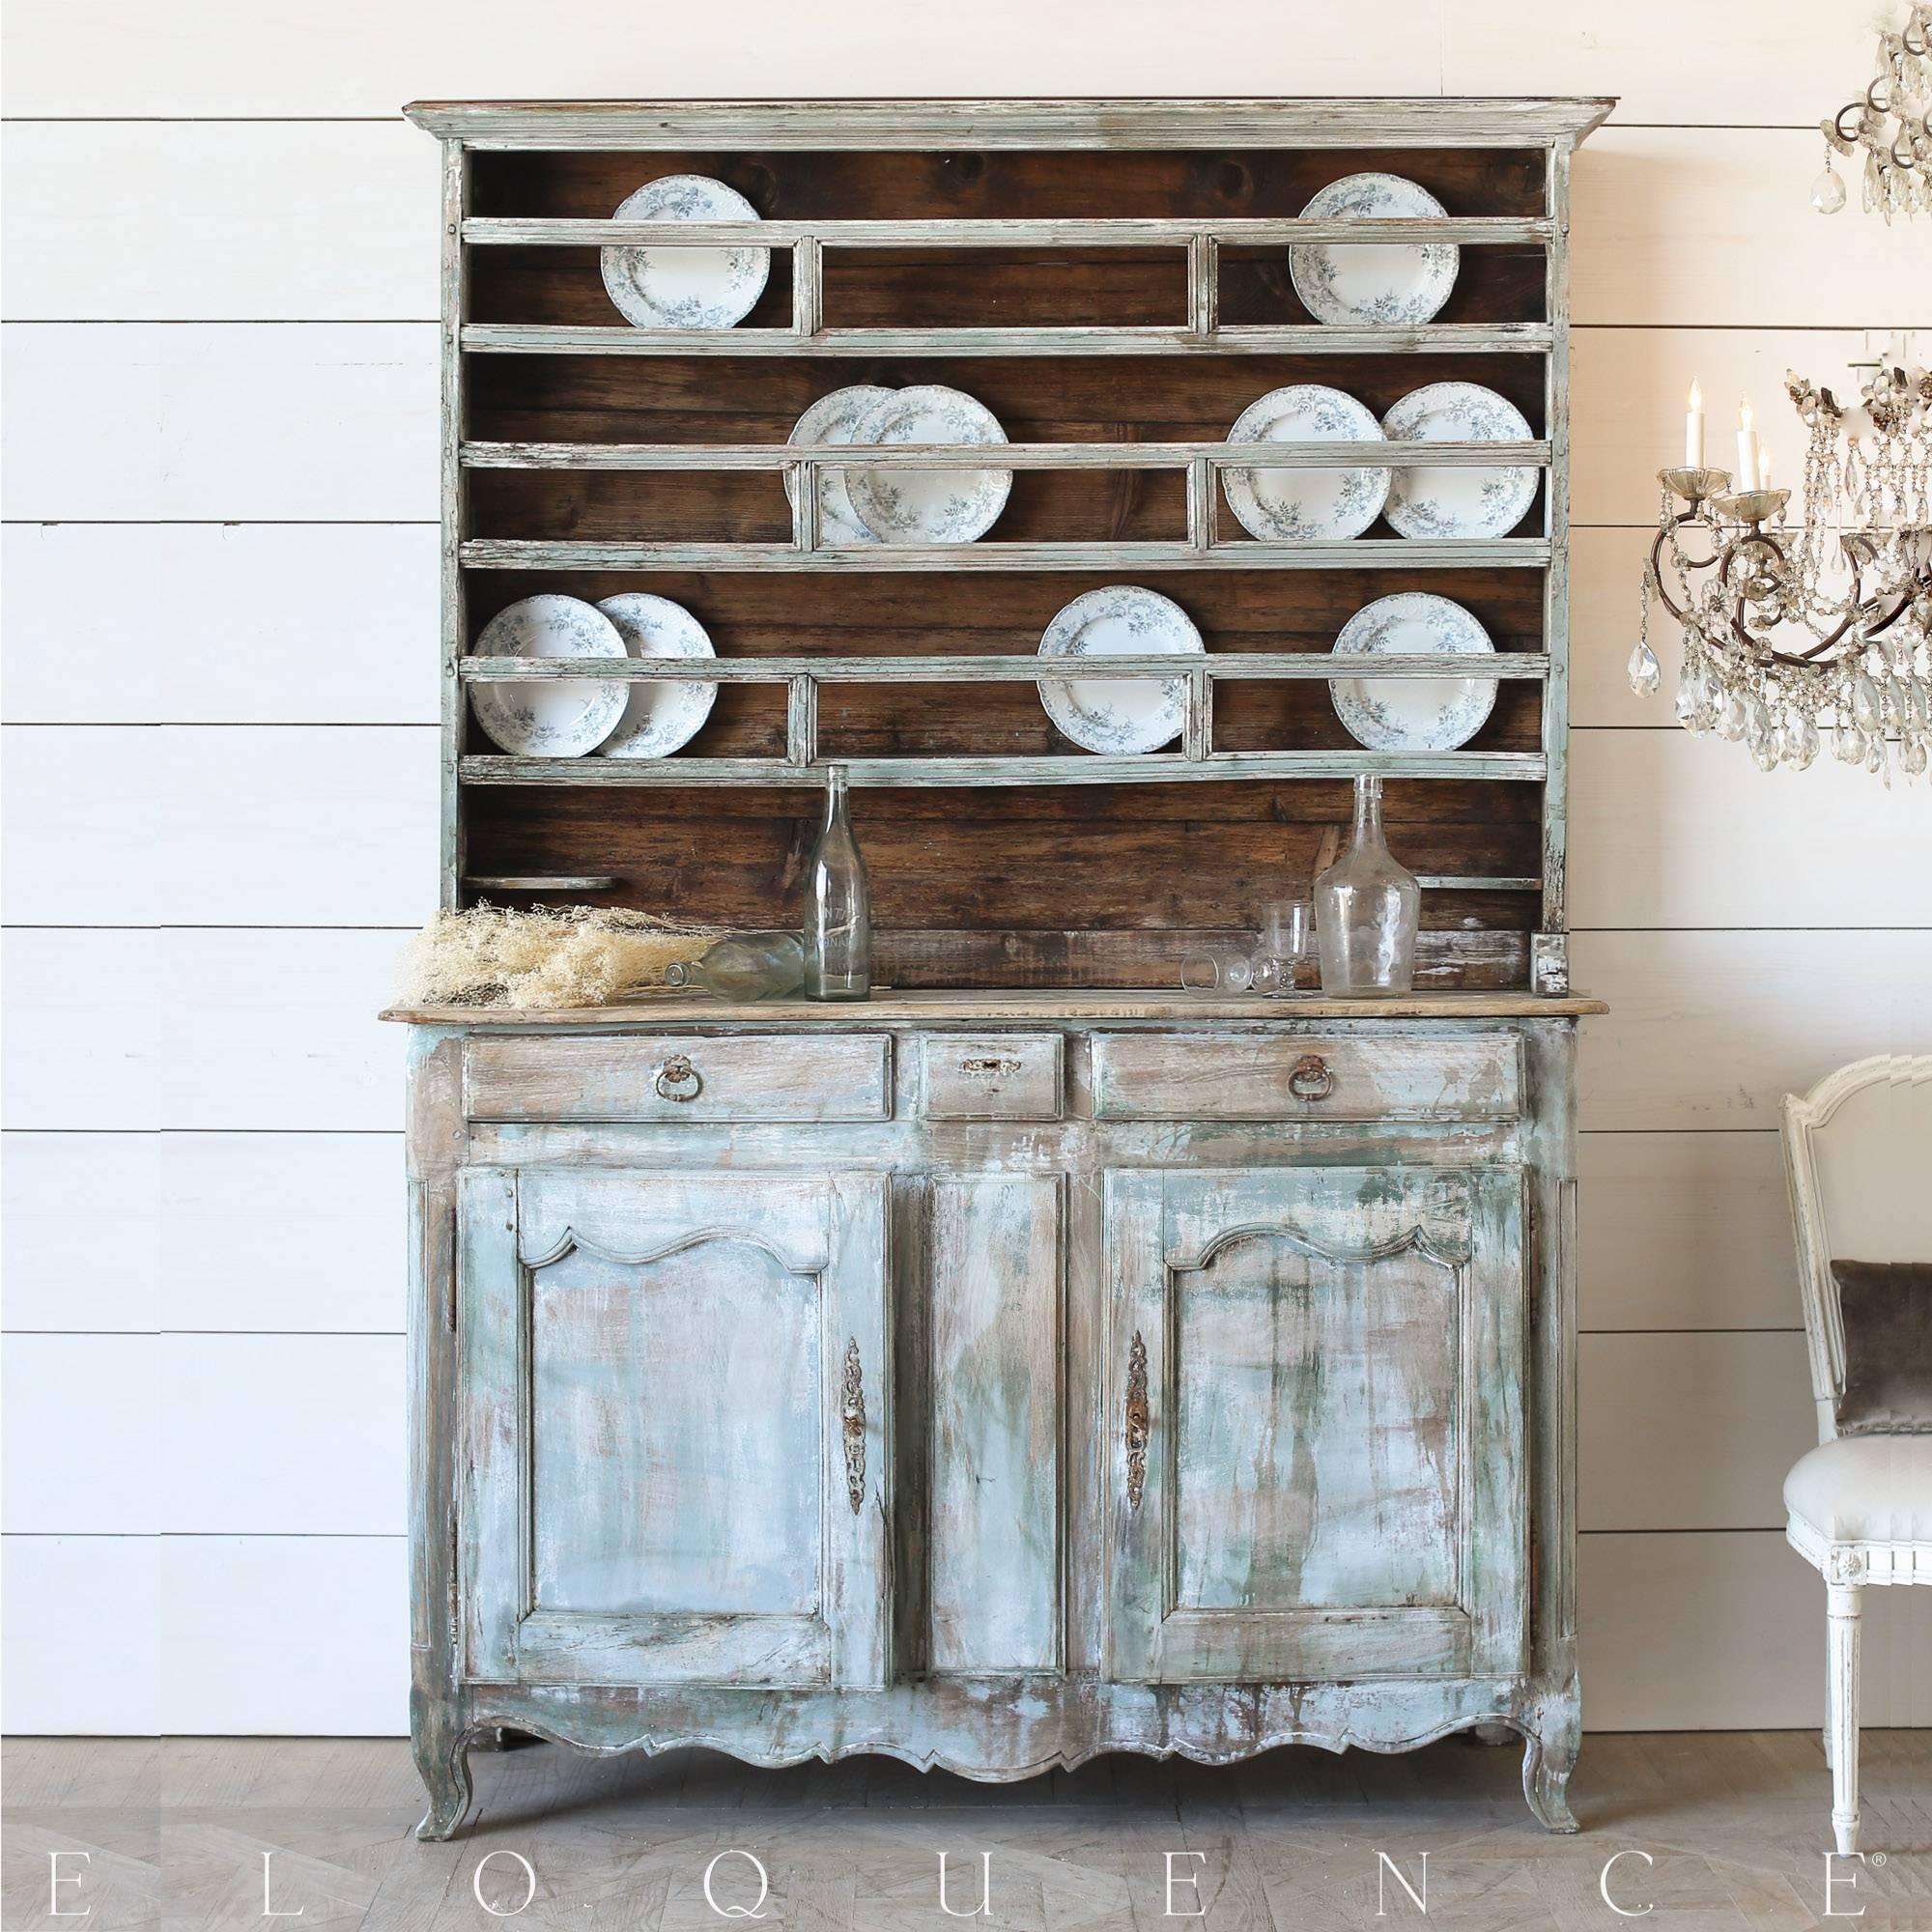 Striking antique cabinetin white washed turquoise, rubbed back to natural wood. The two pieces making up this statement sideboard are a perfect blend of beauty and functionality. Offering plenty of storage and display, the unique carvings and